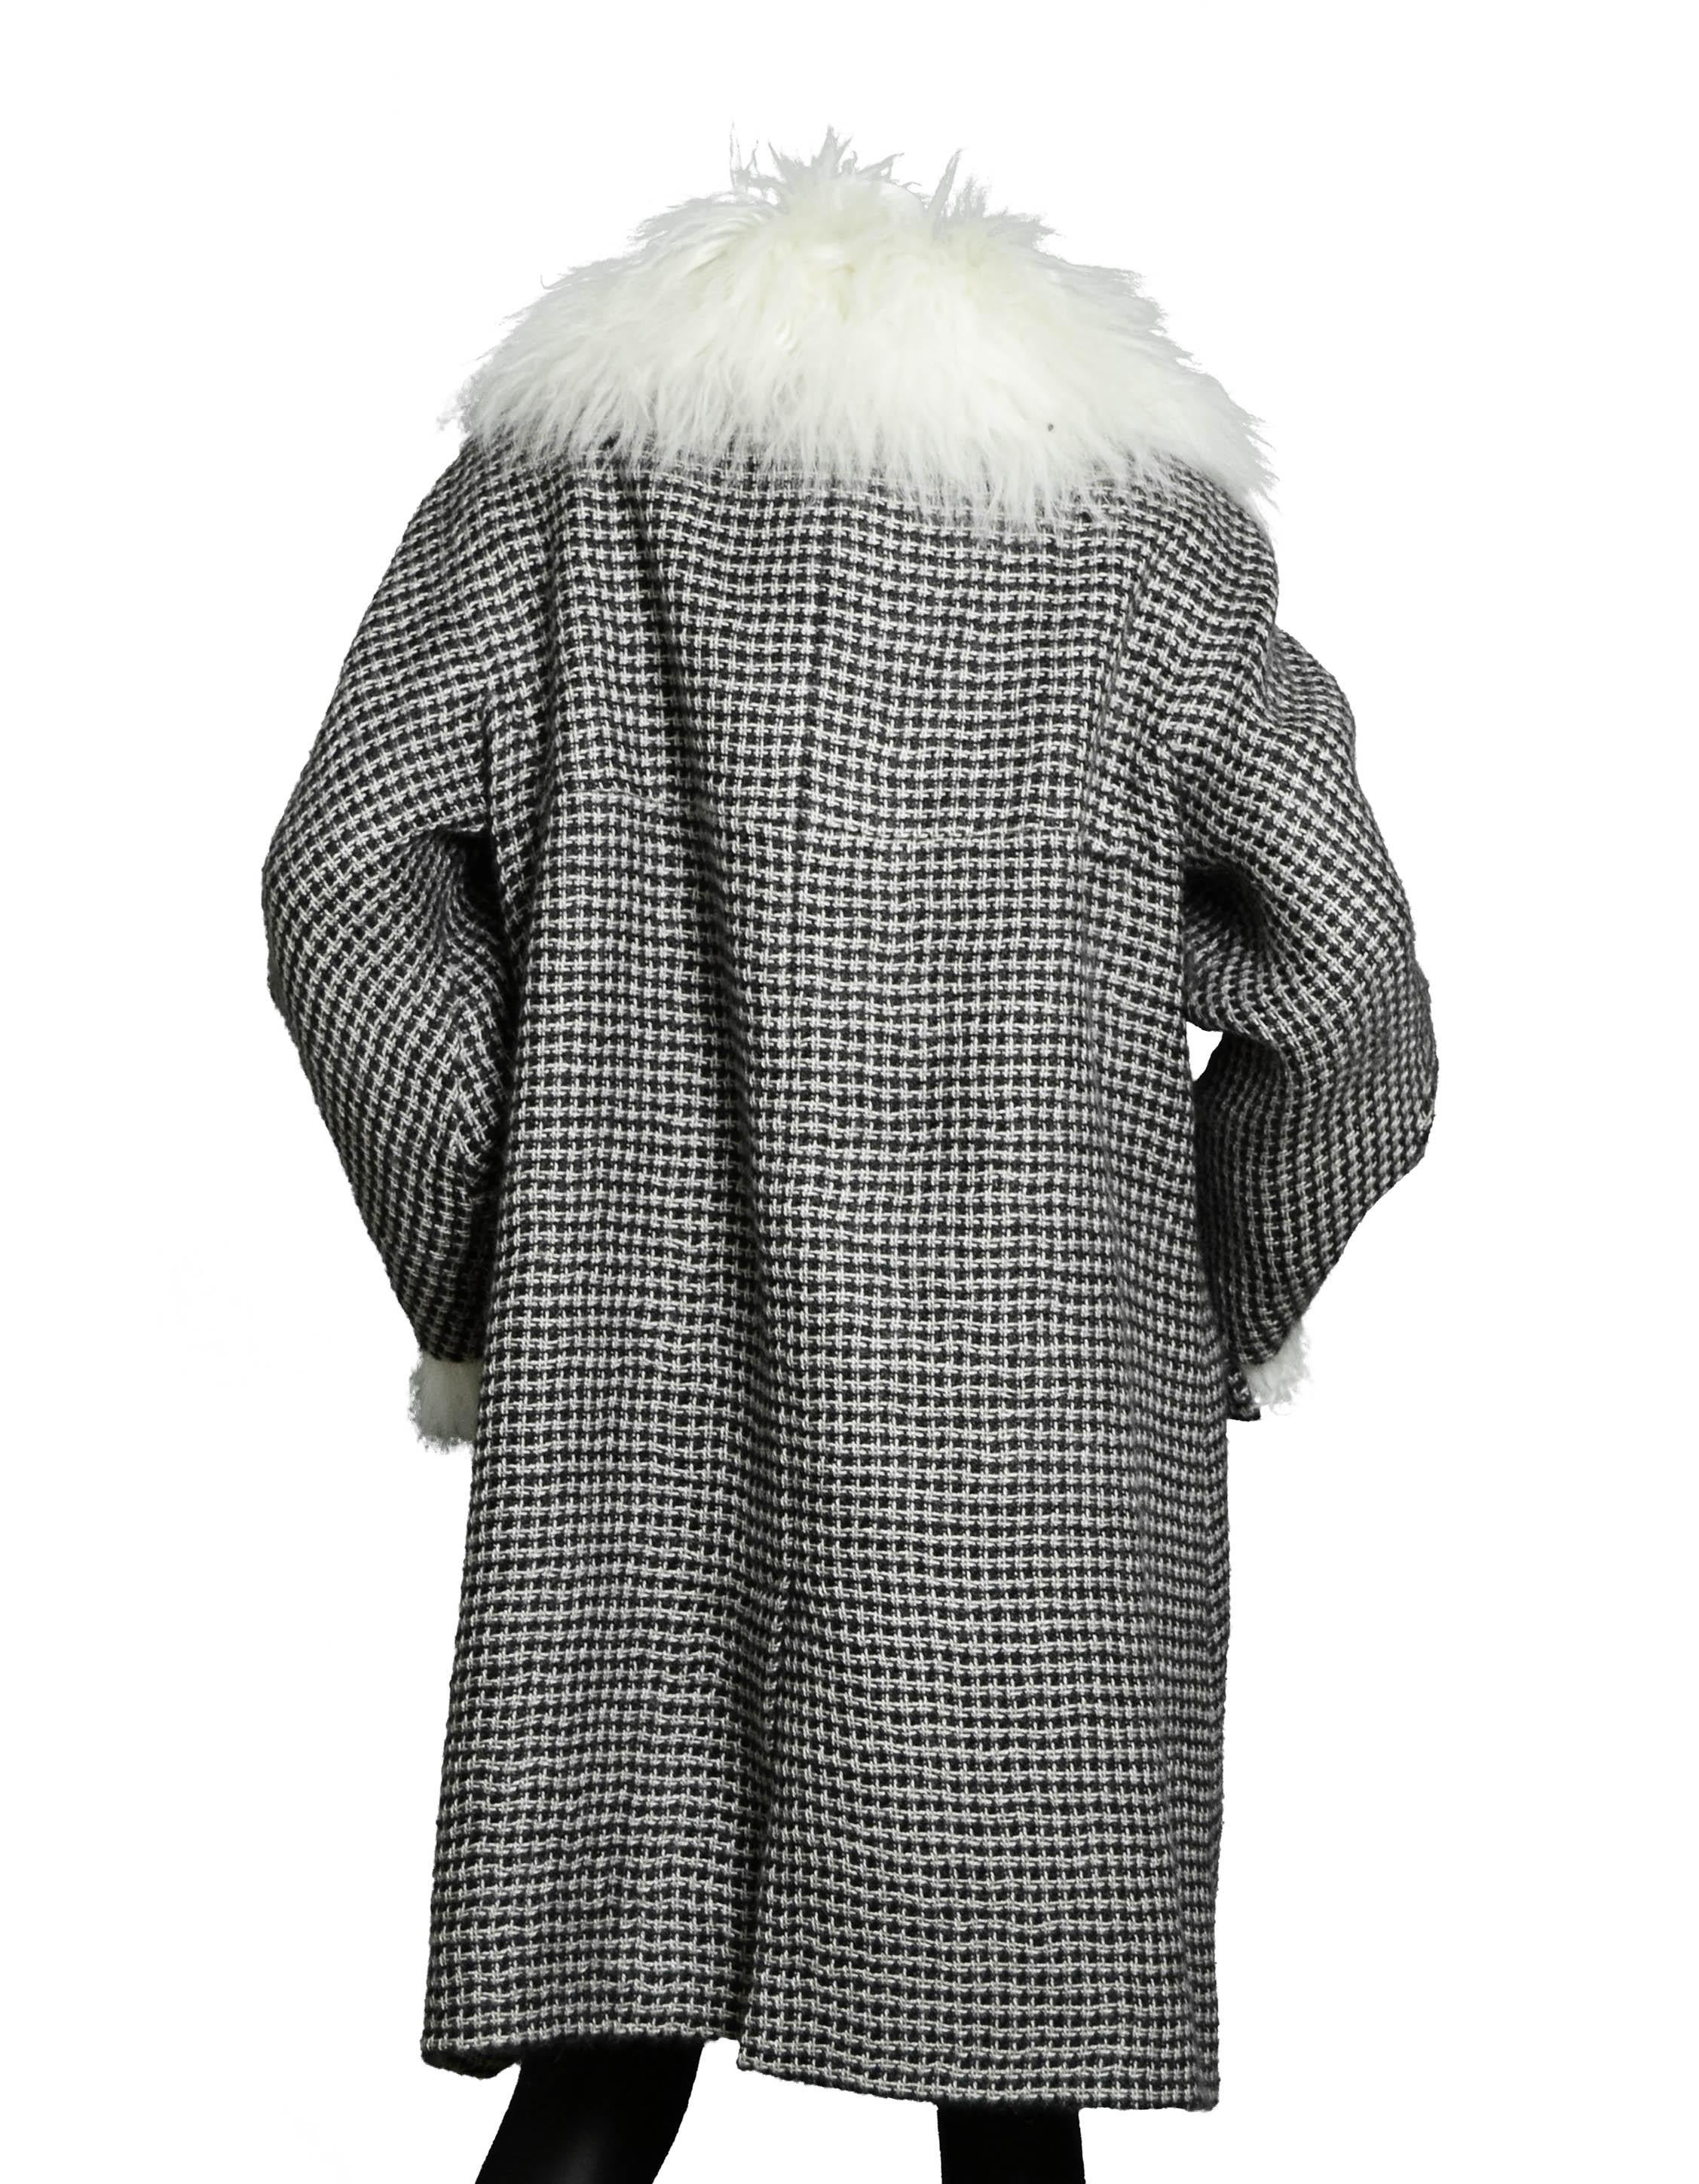 Chanel 2014 Paris-Dallas Mohair Coat W/Detachable Shearling Cuffs & Collar

Made In: France
Year of Production: 2014
Color: Black & white tweed
Materials: 100% Mohair
Lining: 100% Silk
Opening/Closure: Button up
Overall Condition: